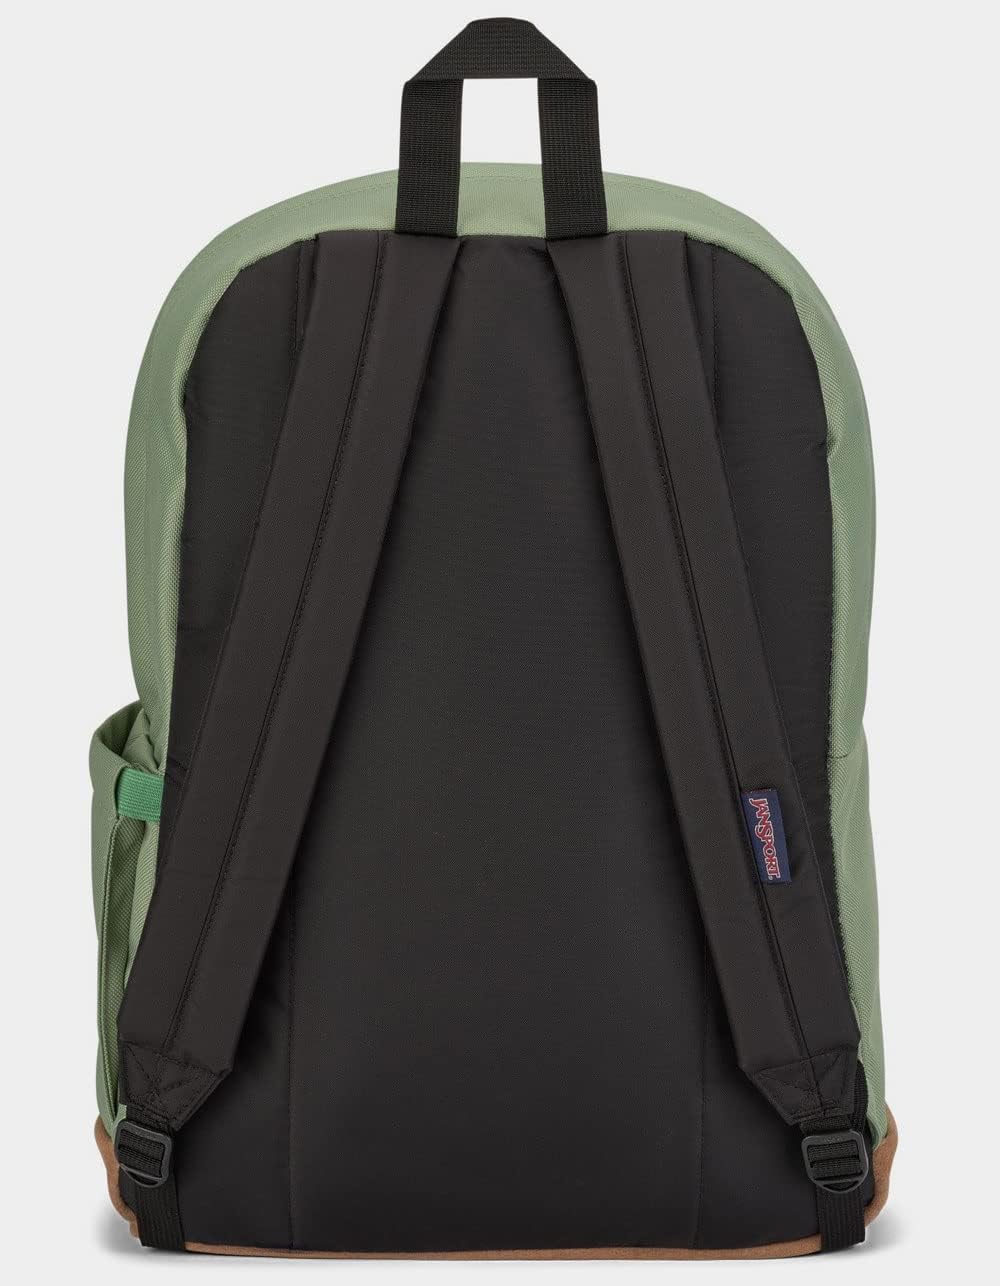 JanSport Right Pack Backpack - Class, Travel, Work, or Laptop Bookbag with Leather Bottom, Loden Frost